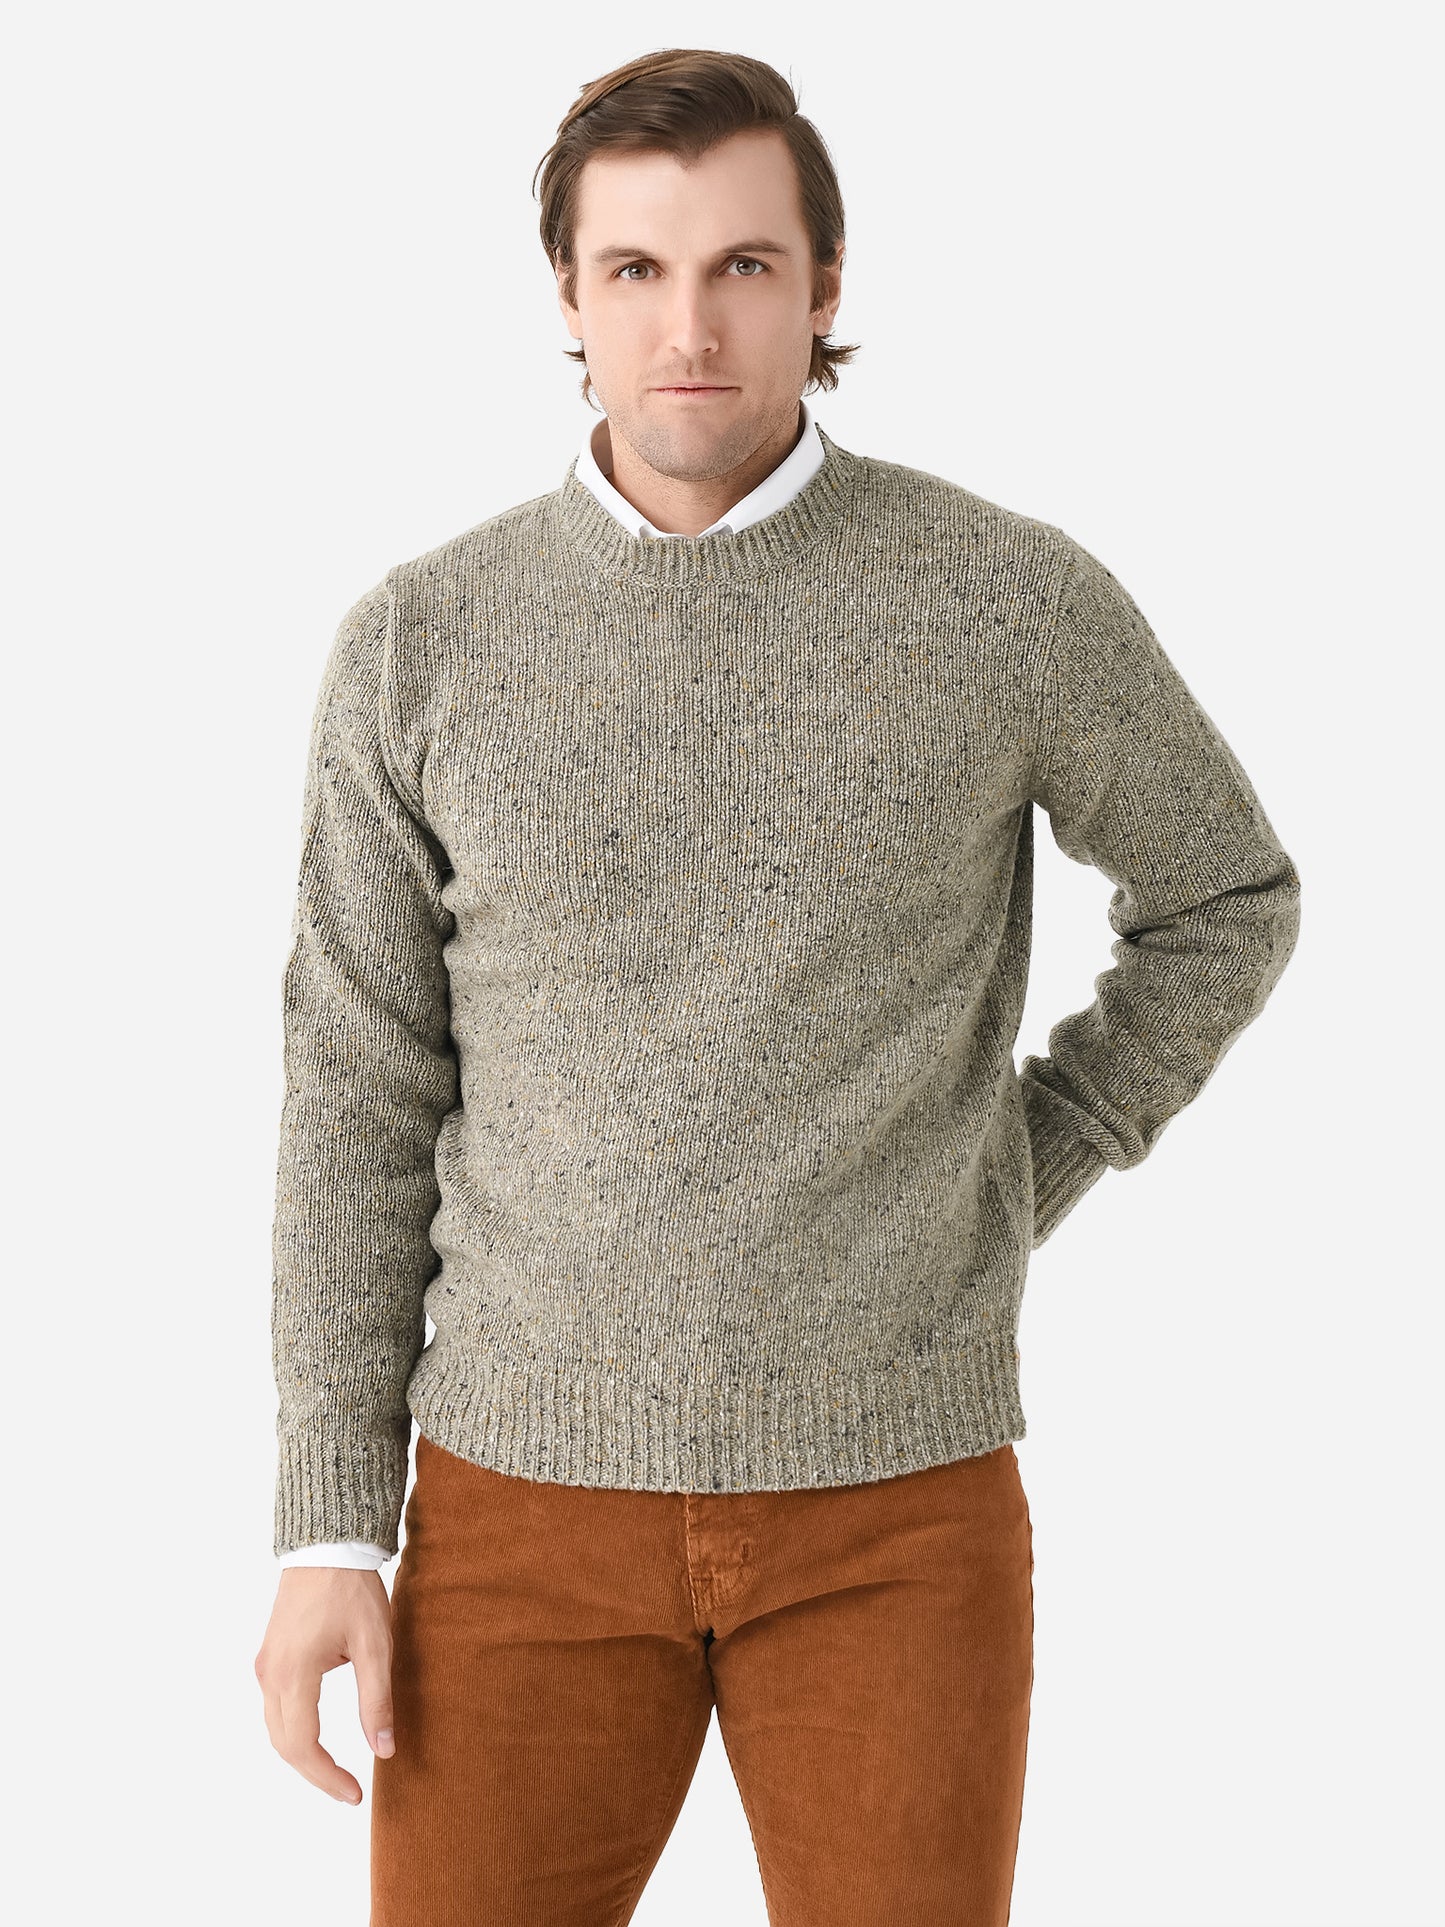 Hartford Men's Donegal Crew Knitted Pullover